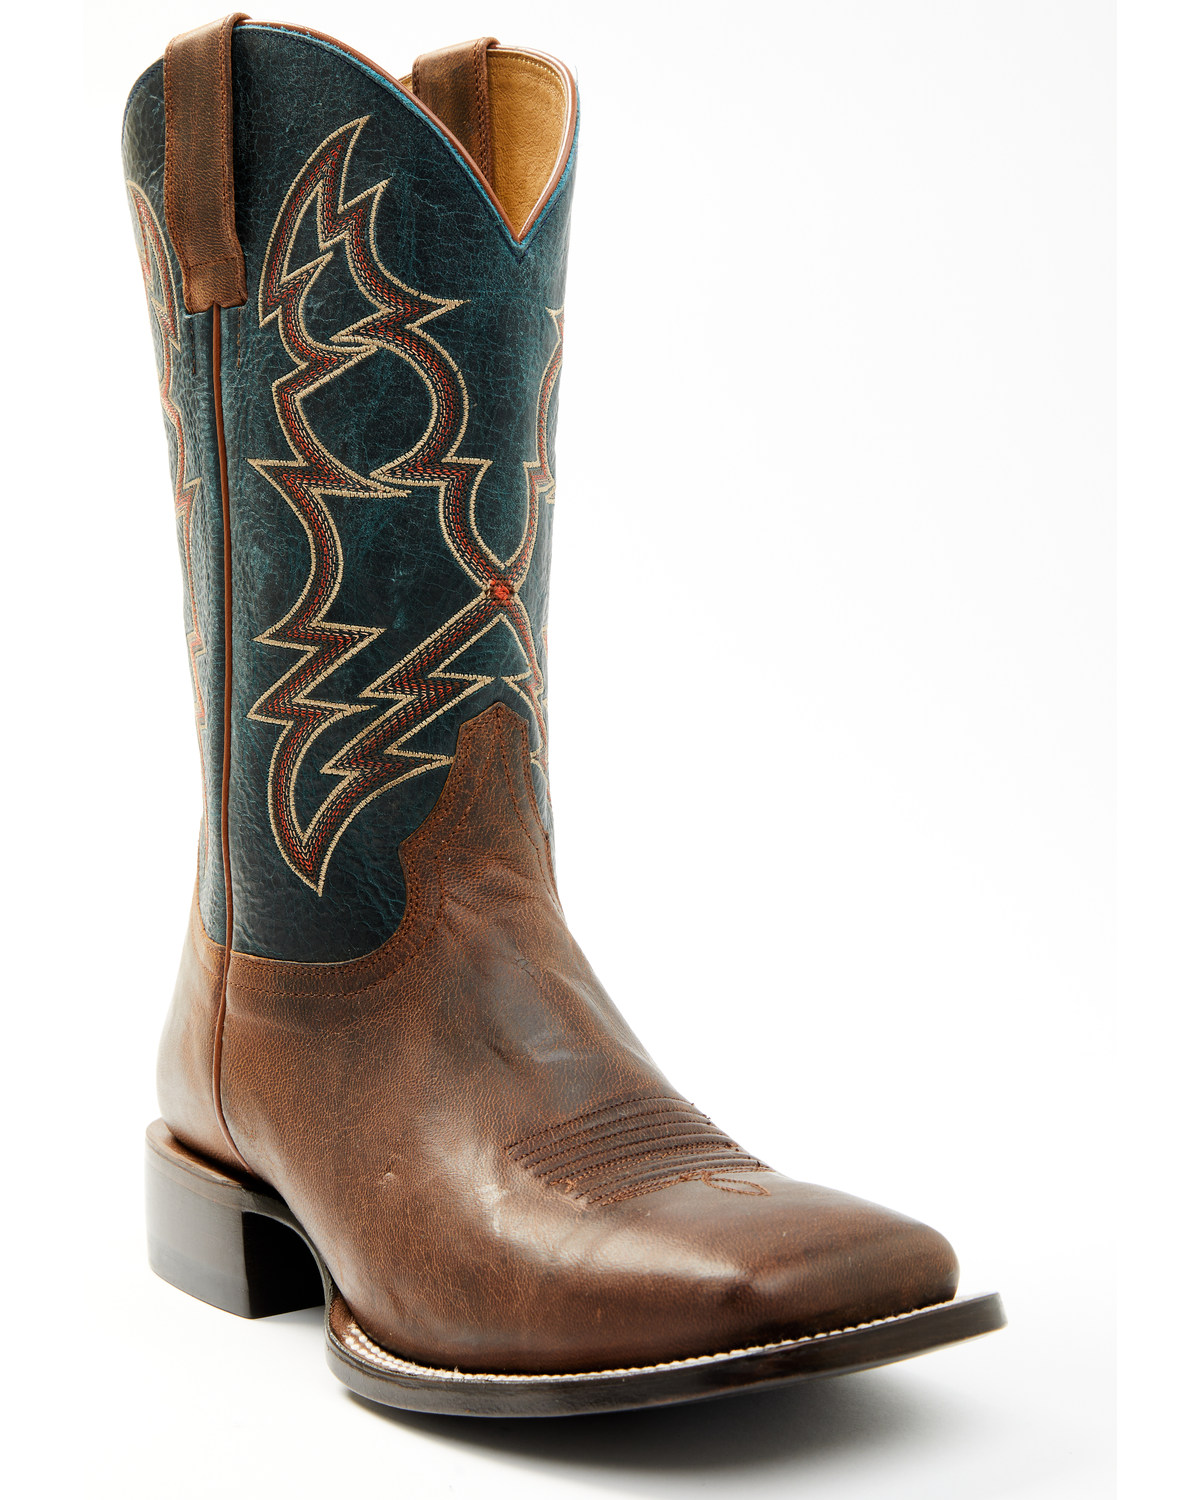 Cody James Men's Mad Cat Western Boots - Broad Square Toe